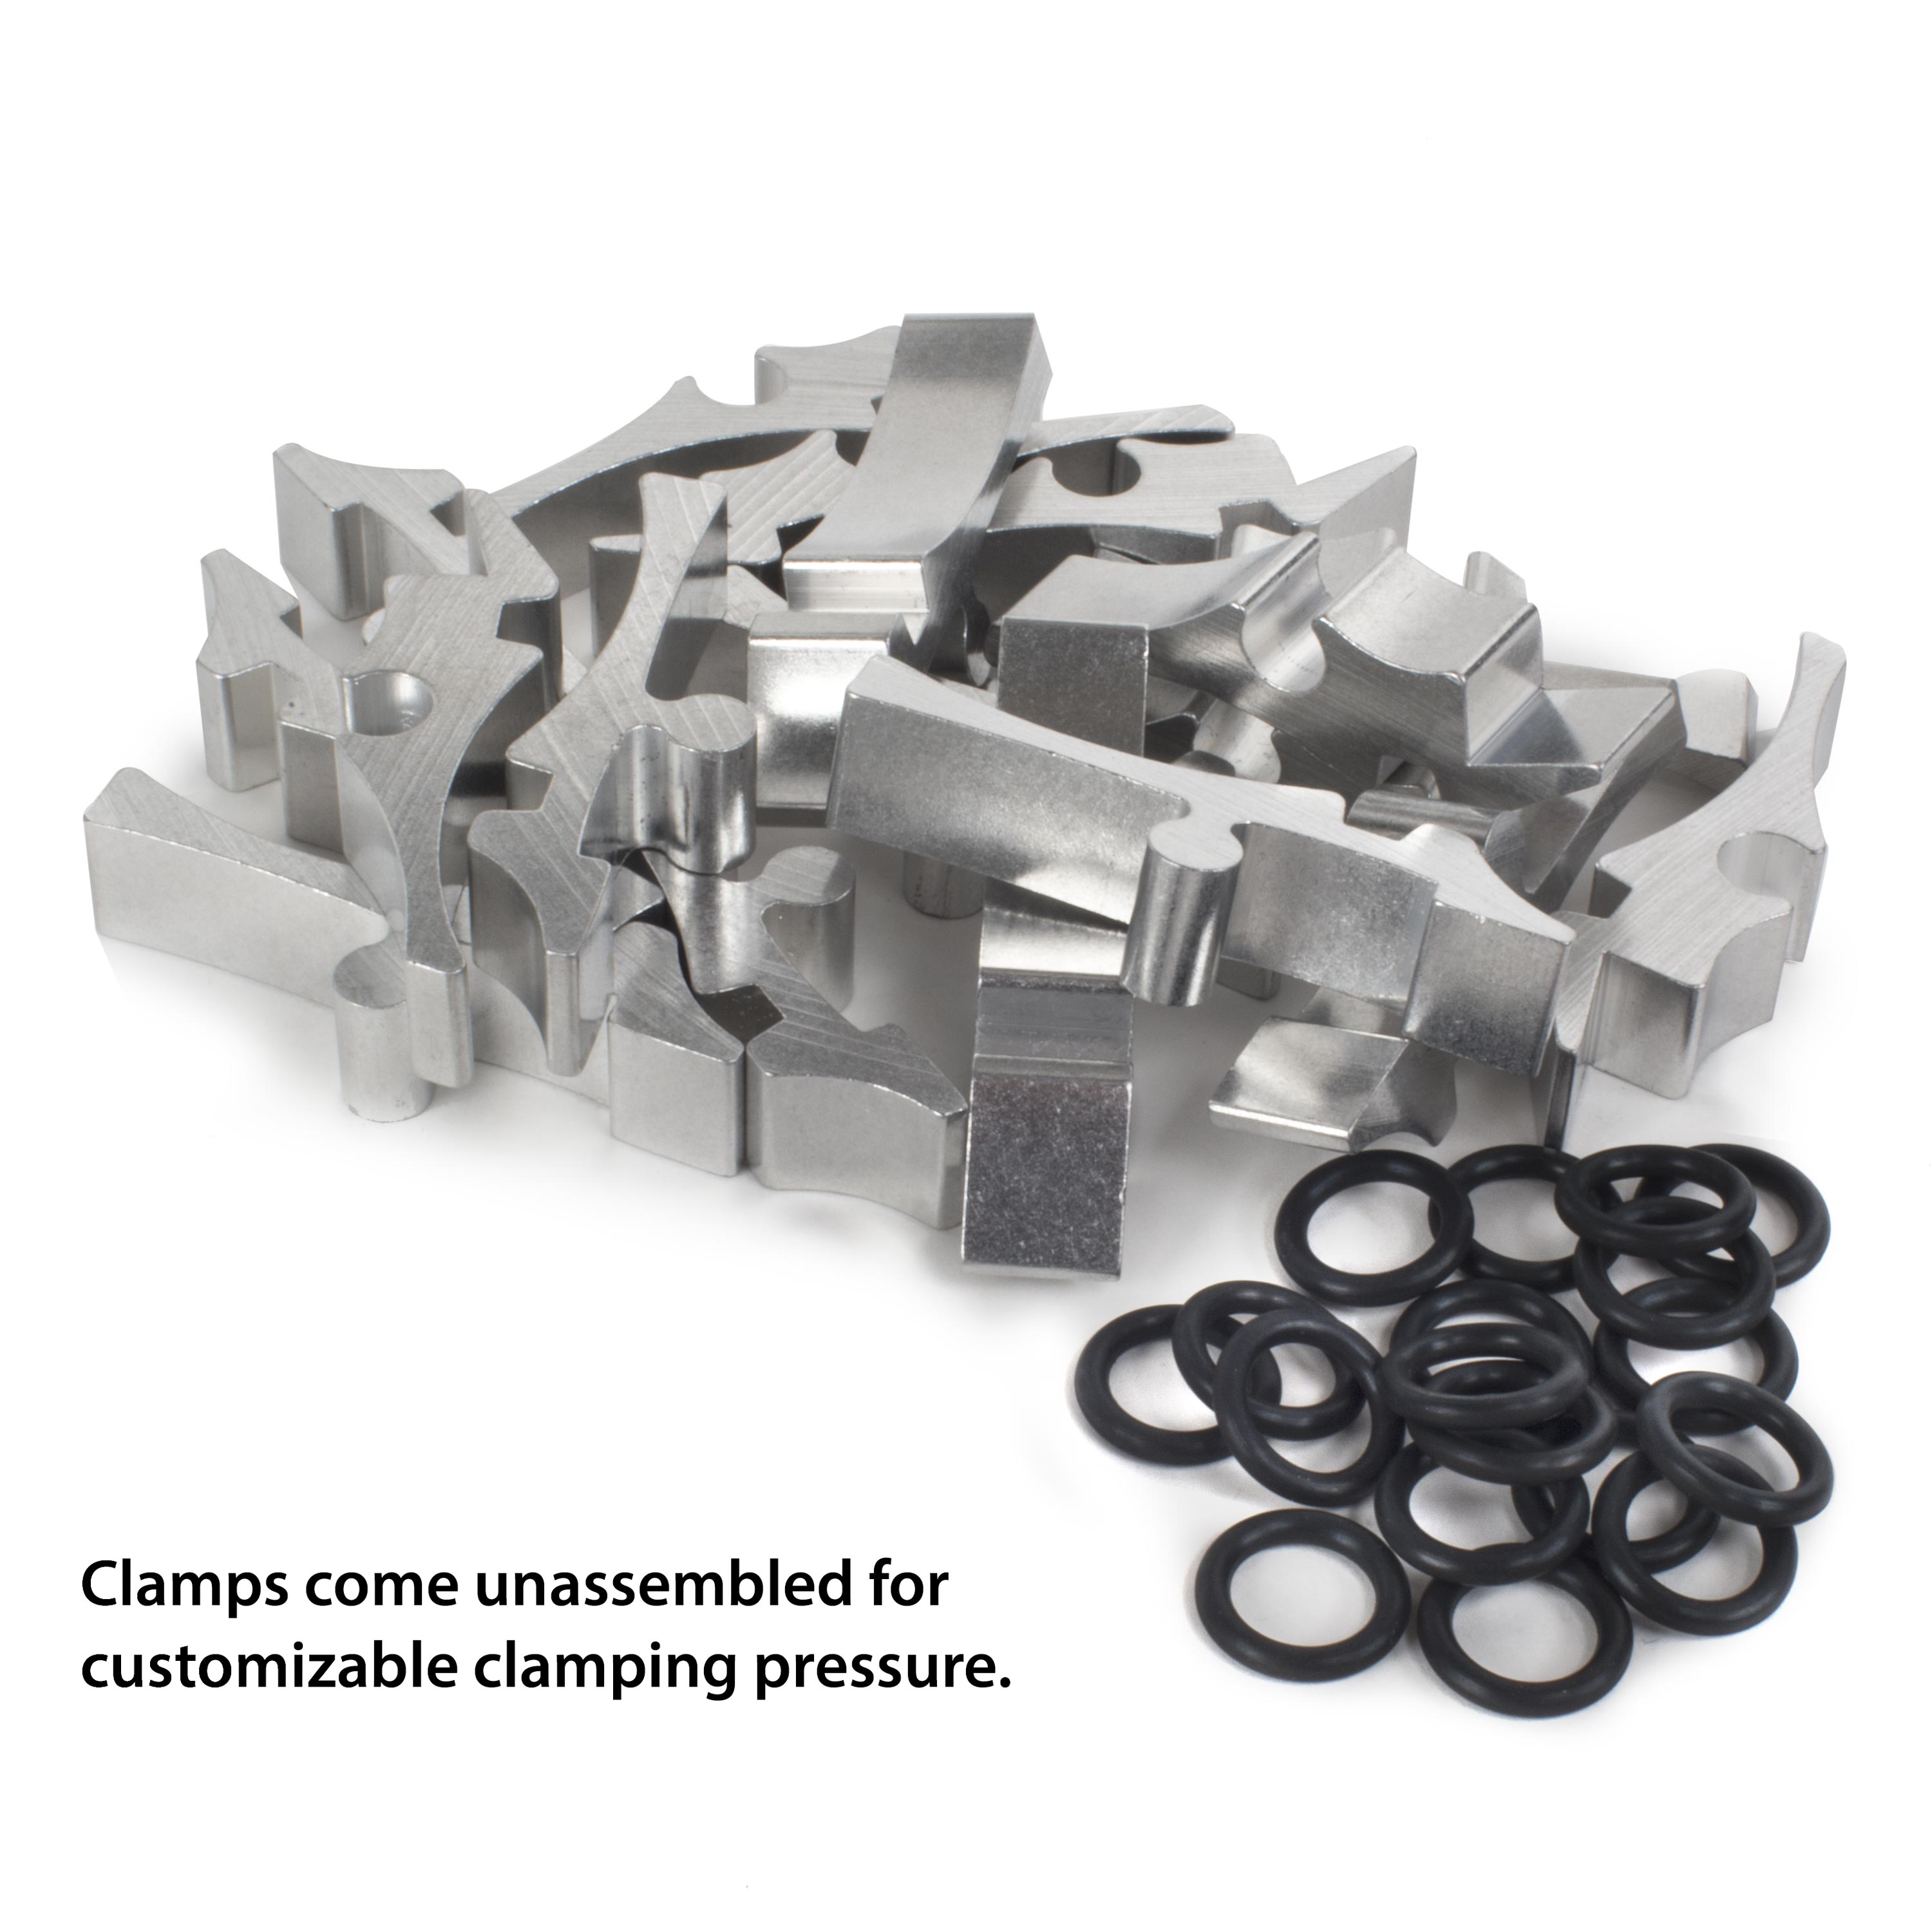 Kerfed Lining Clamps - 10 Pack